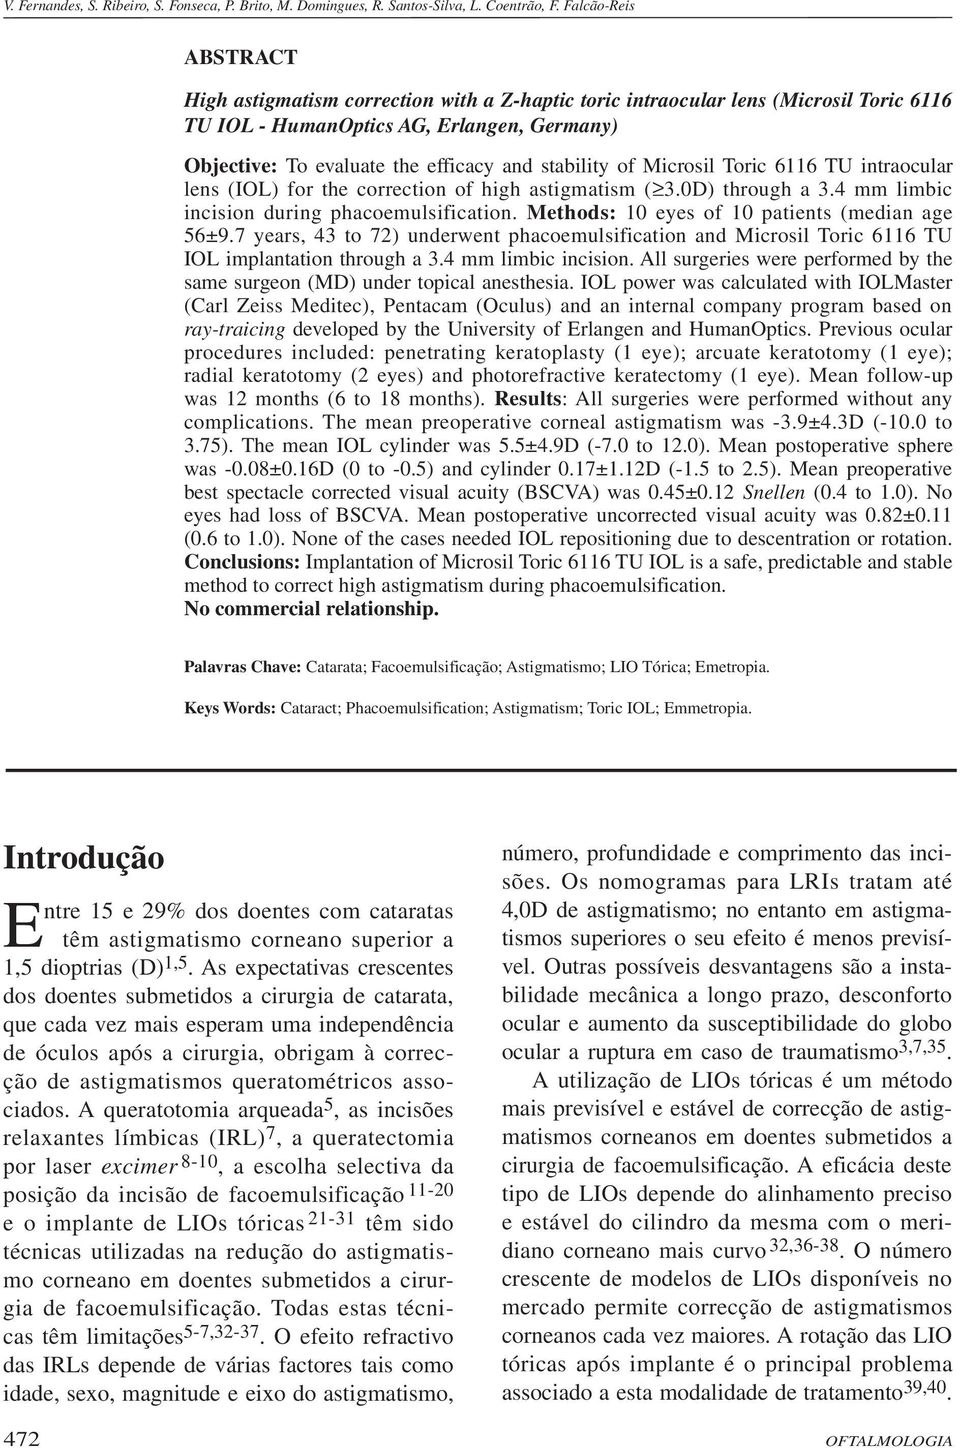 stability of Microsil Toric 6116 TU intraocular lens (IOL) for the correction of high astigmatism ( 3.0D) through a 3.4 mm limbic incision during phacoemulsification.